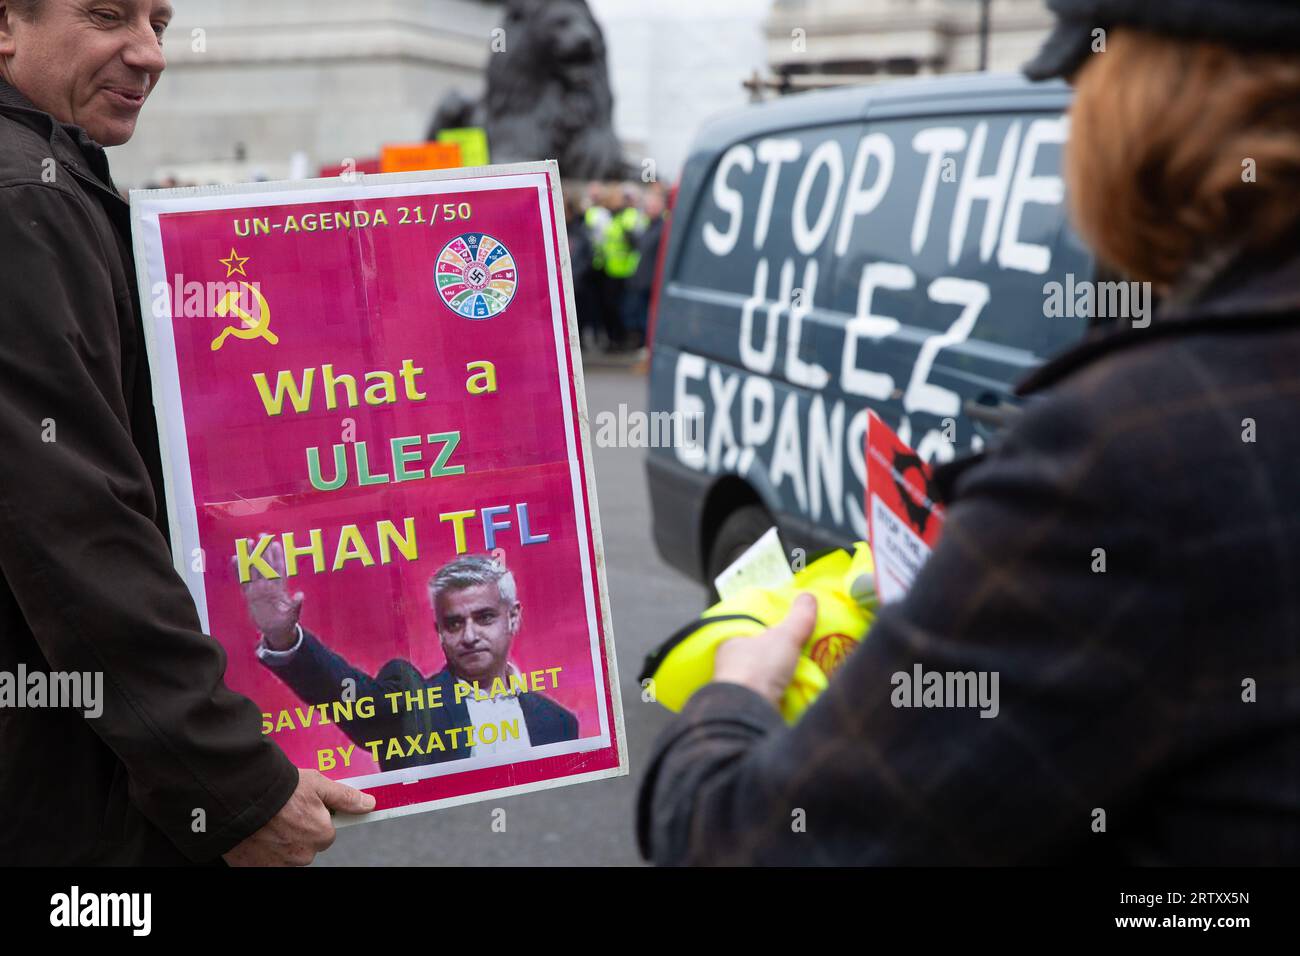 Participants gather with placards during a protest against the expansion of London's ultra-low emission zone (ULEZ) around Trafalgar Square in London. Stock Photo